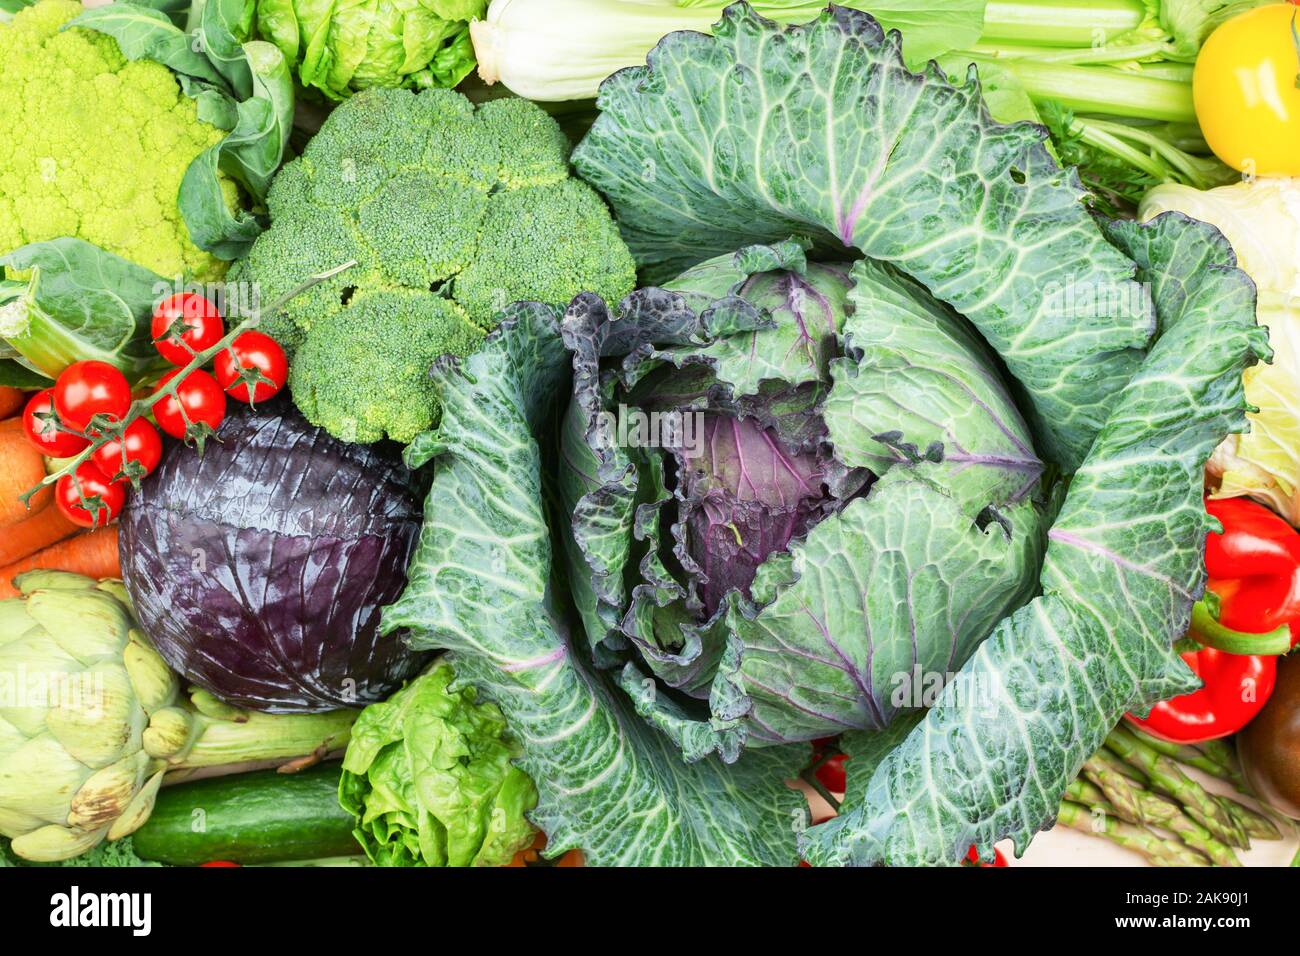 Top view of vegetables on wooden table, carrots velery tomatoes cabbage broccoli, copy space, selective focus Stock Photo